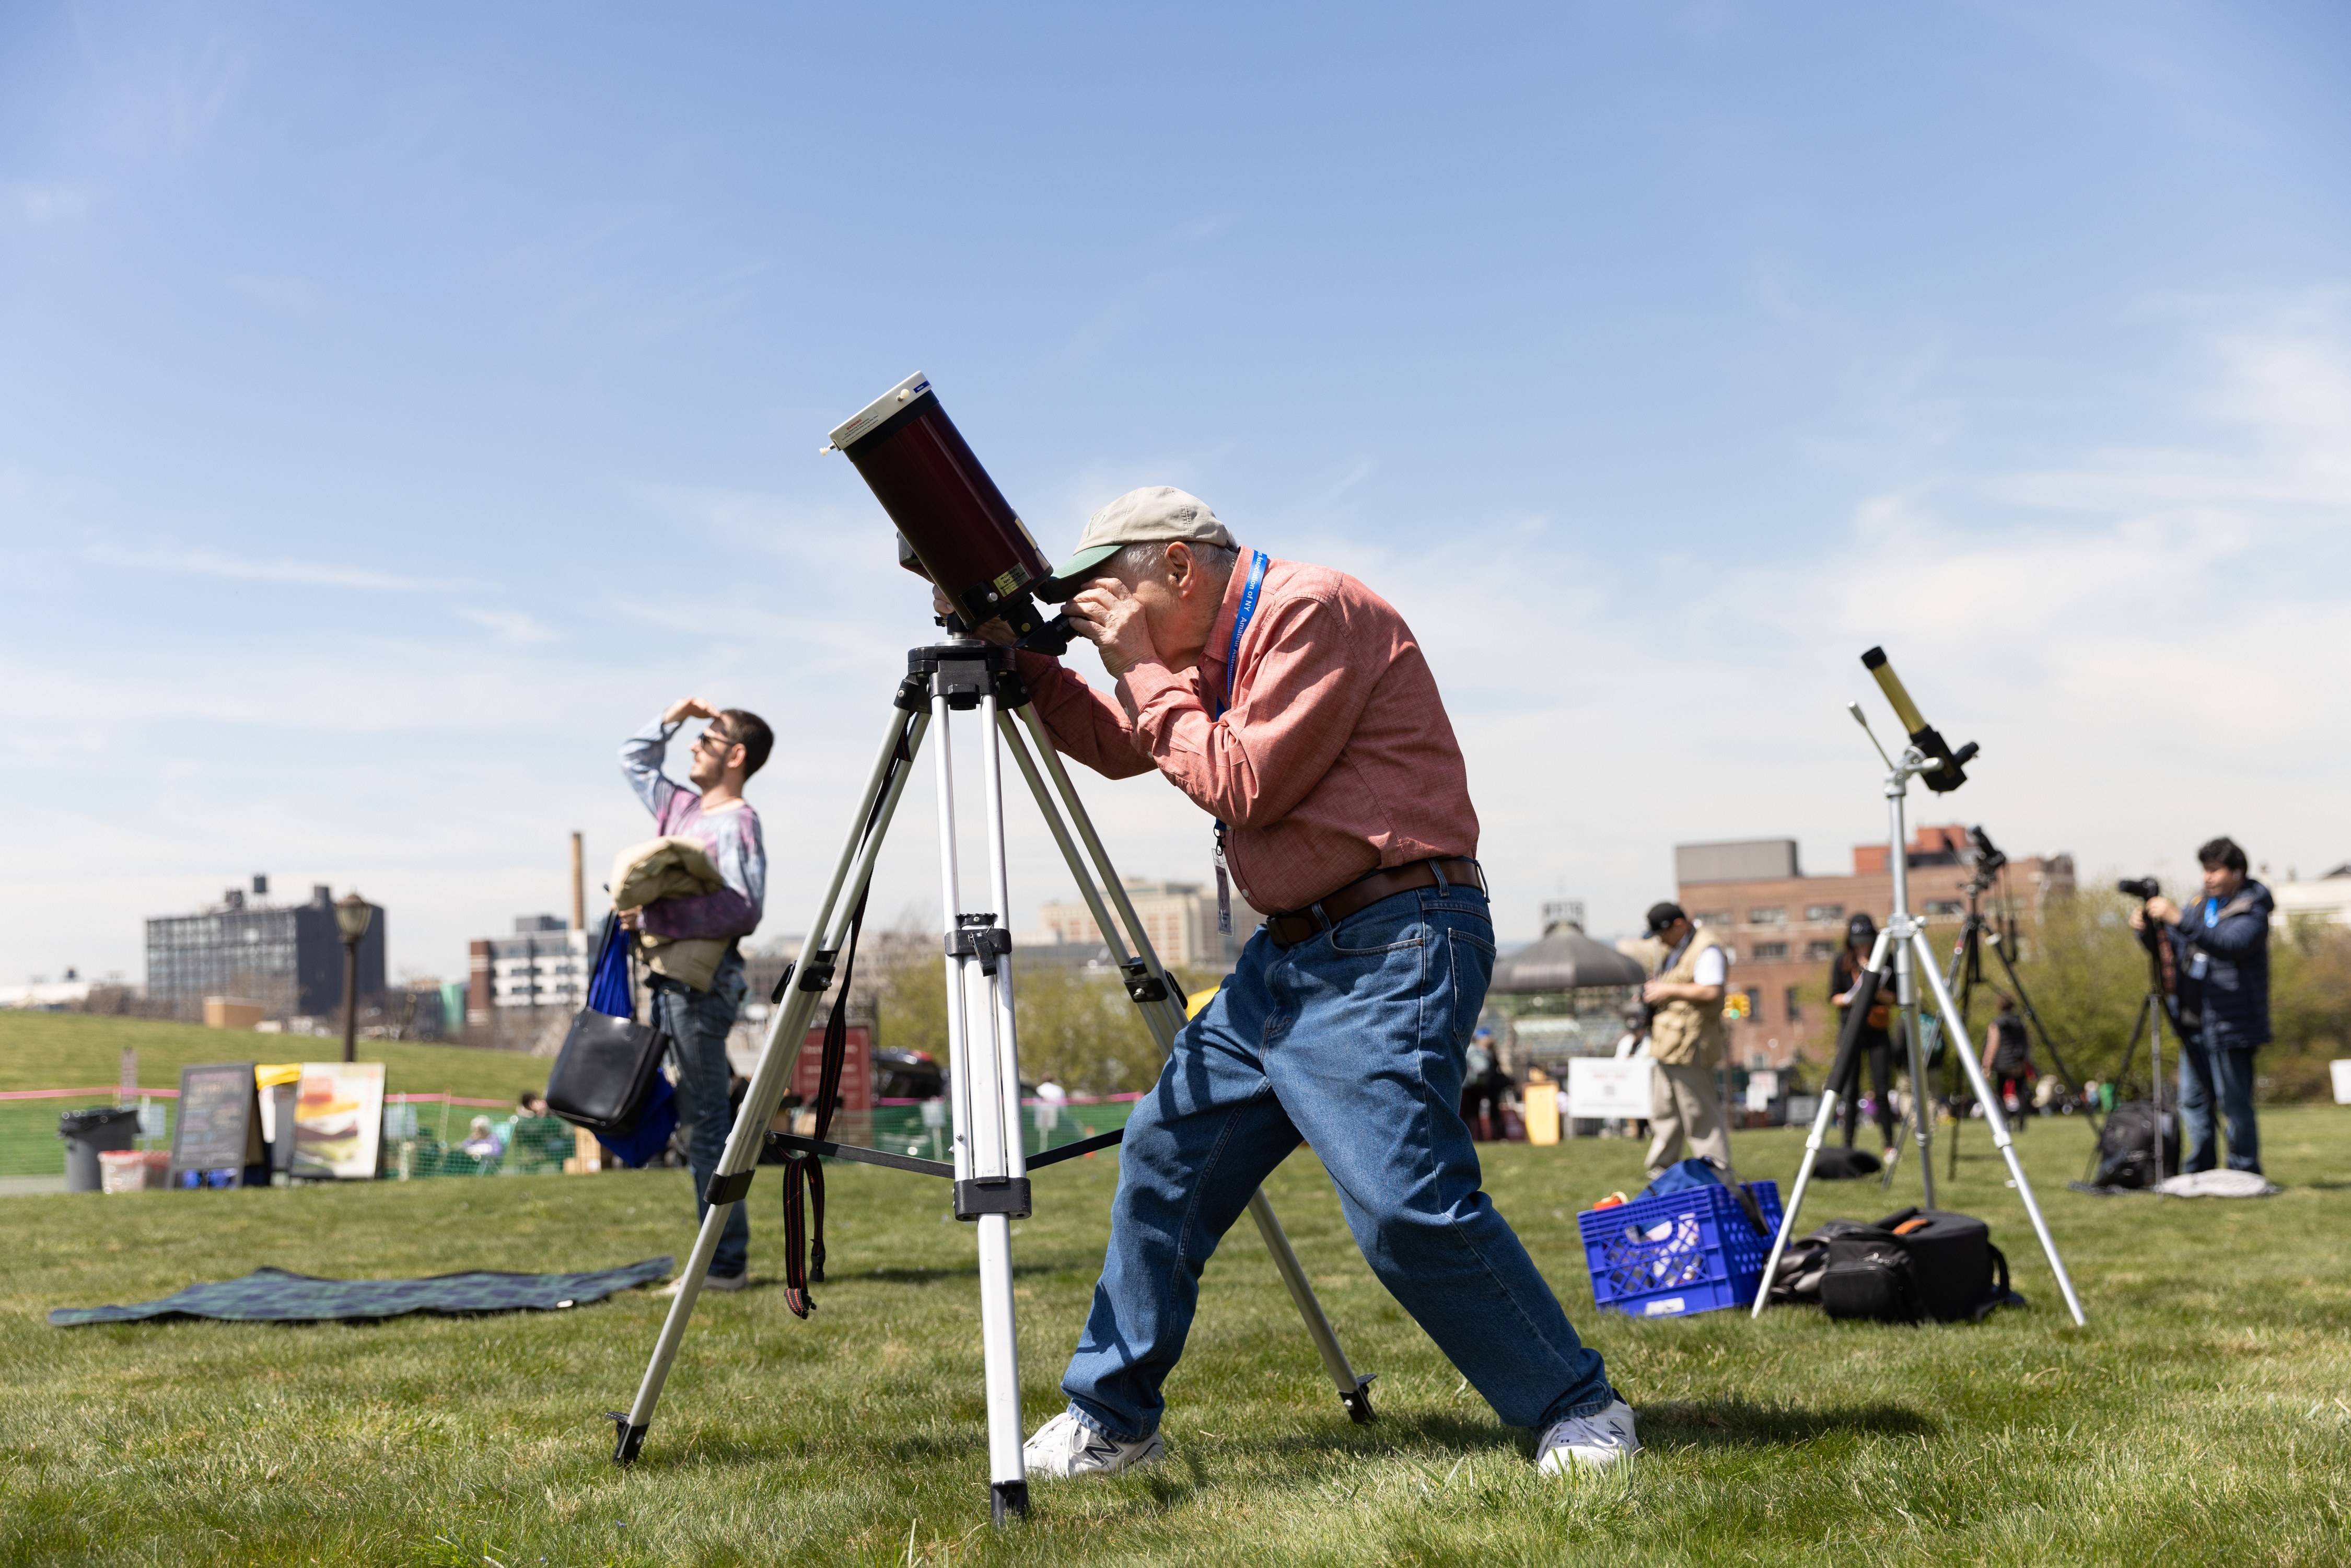 Joe Delfausse from the Amateur Astronomers Association sets up his telescope for the solar eclipse at Greenwood Cemetery in Brooklyn, New York on April 8, 2023.